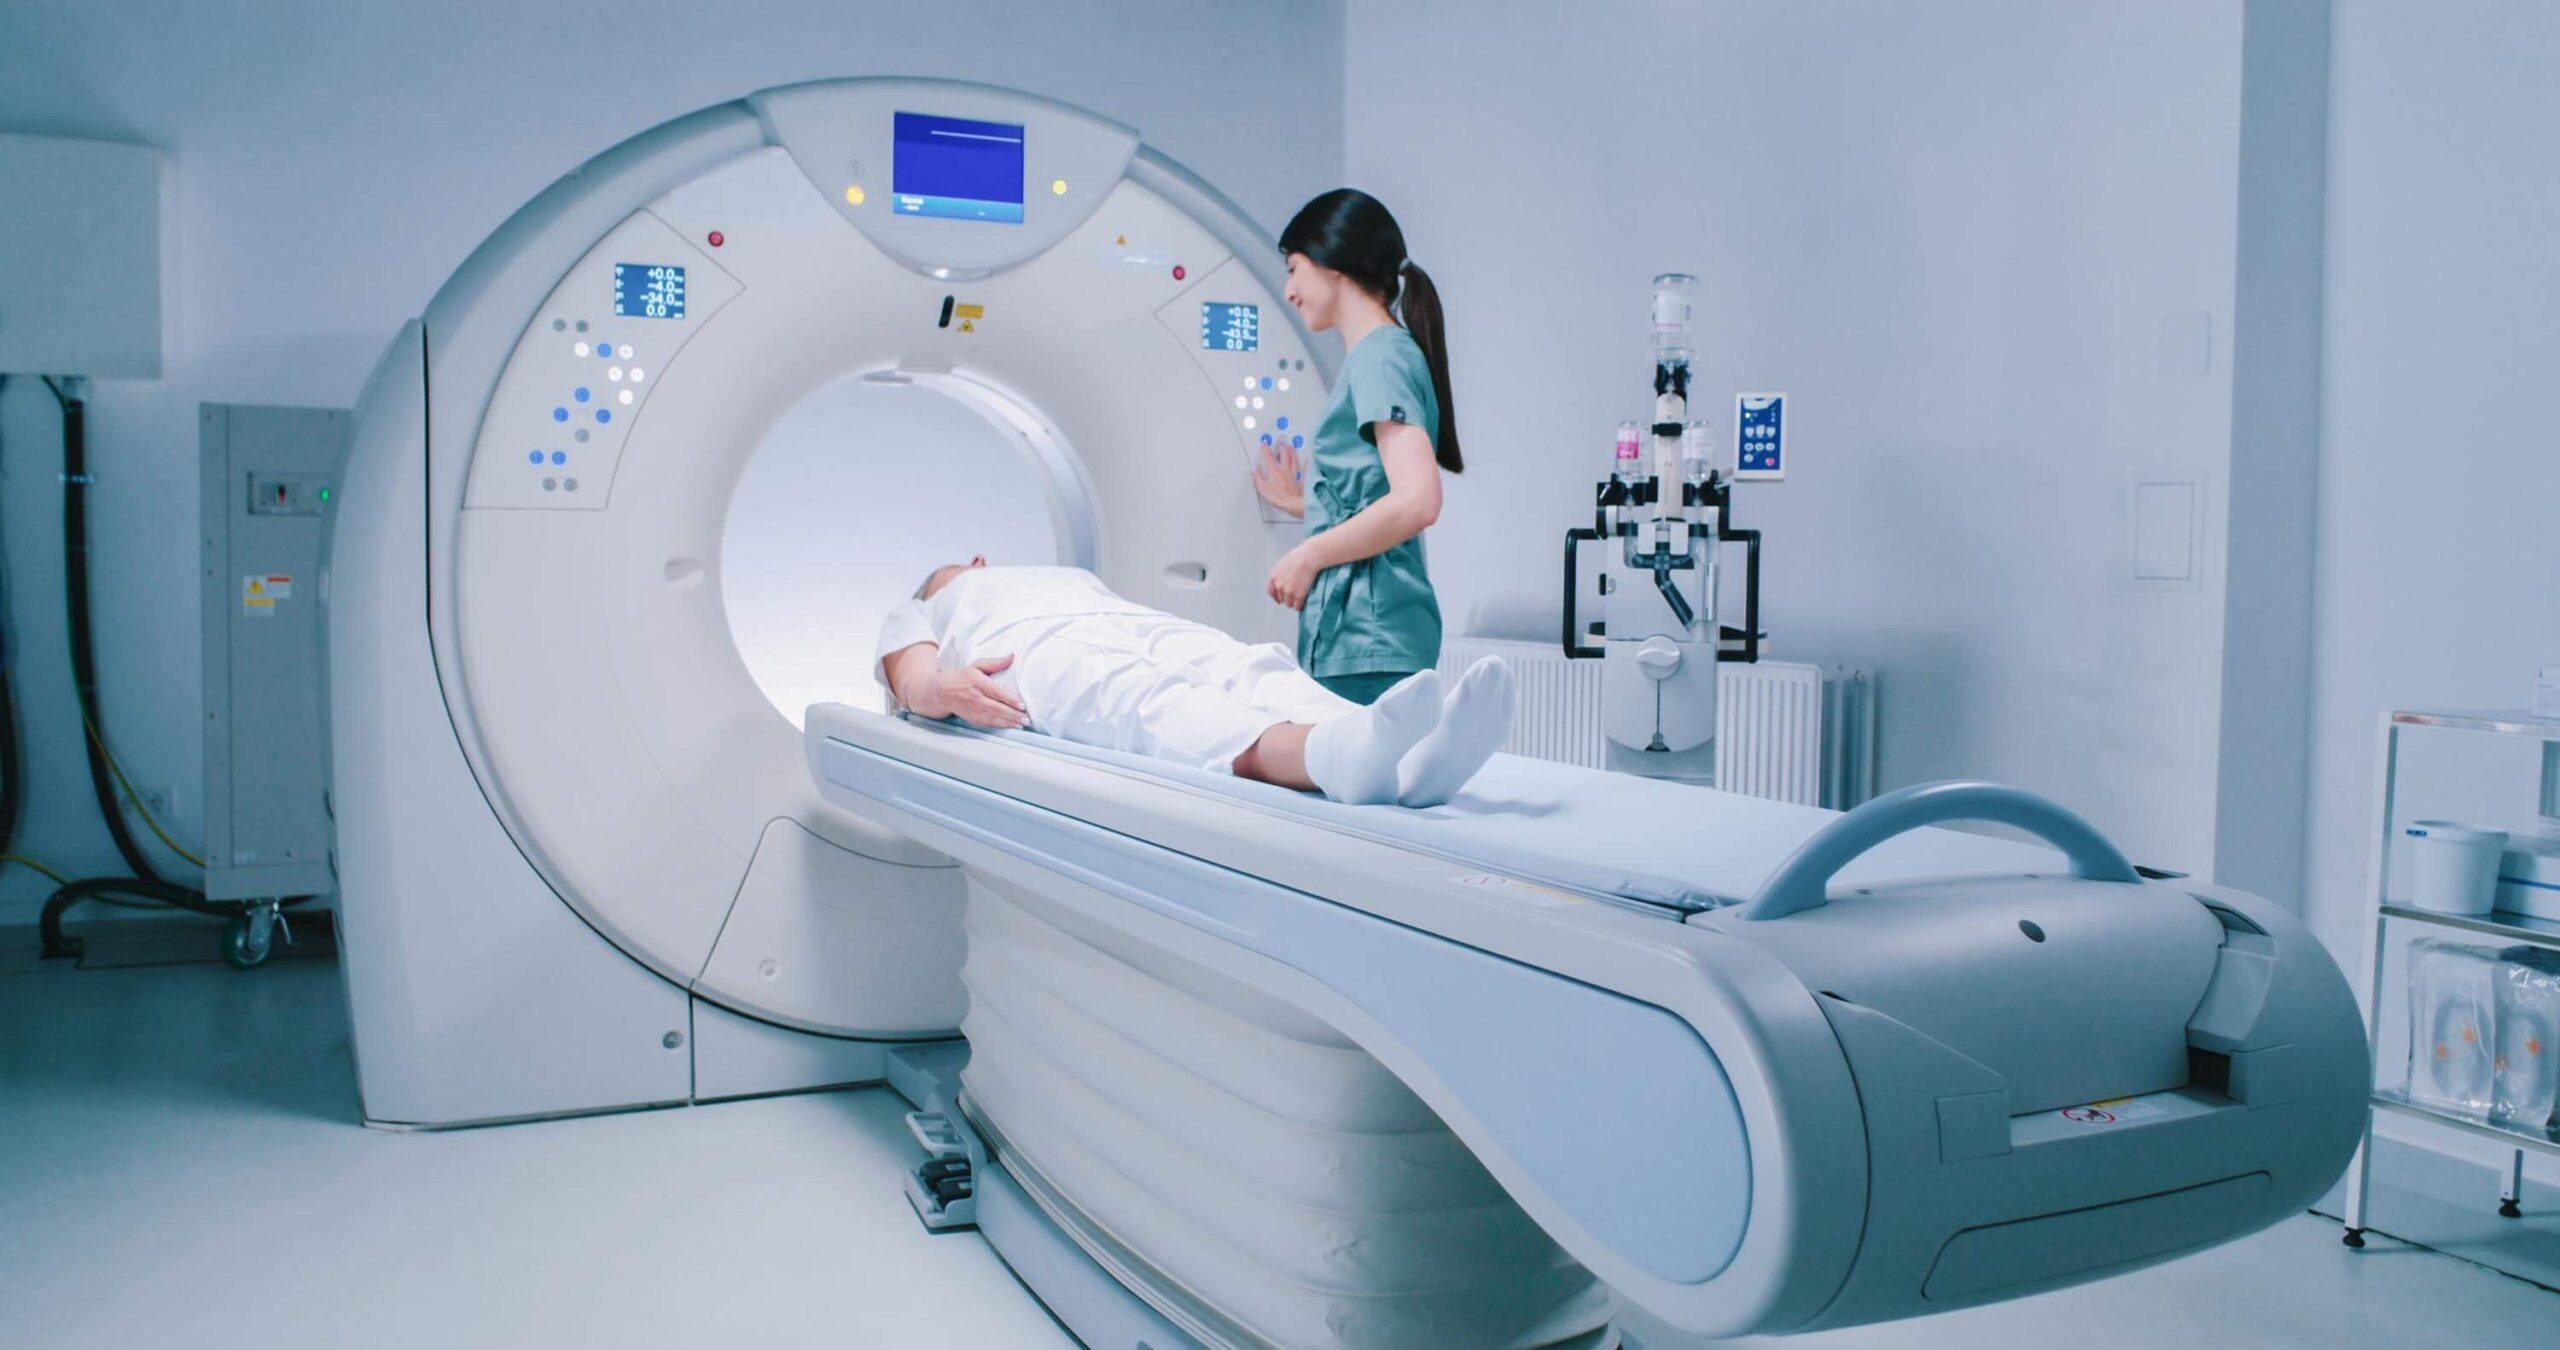 How Much Is A CT Scan Without Insurance Texas?